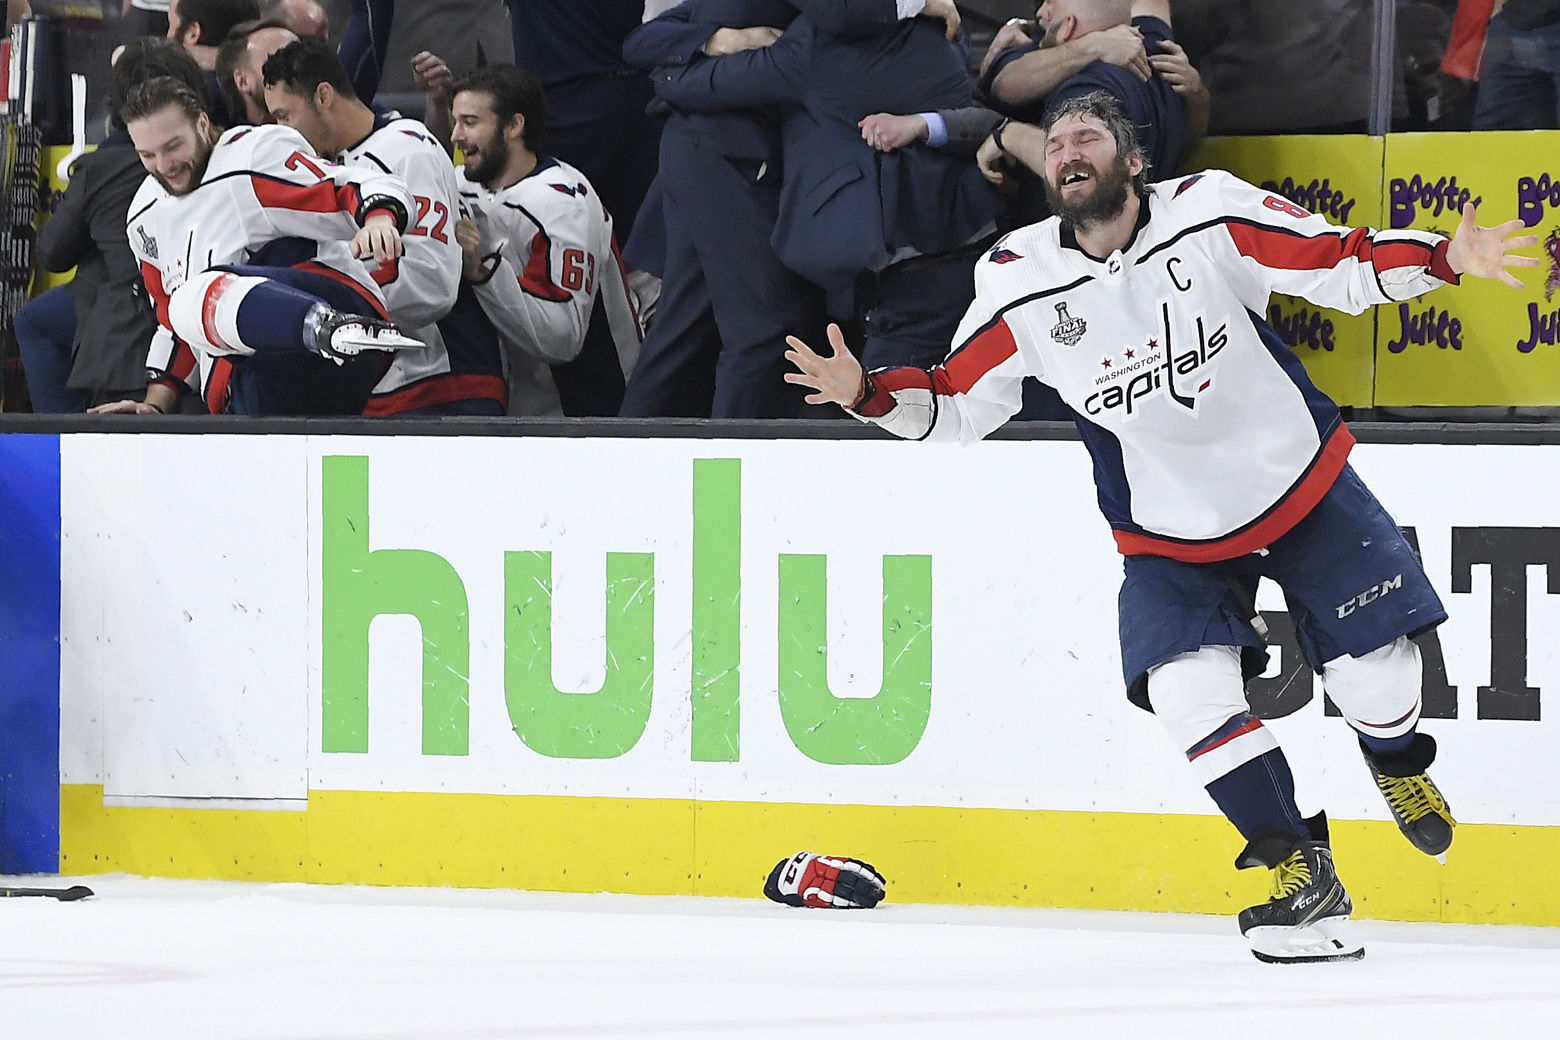 Washington Capitals left wing Alex Ovechkin, of Russia, celebrates as the Capitals defeated the Vegas Golden Knights in Game 5 of the NHL hockey Stanley Cup Finals to win the Stanley Cup Thursday, June 7, 2018, in Las Vegas. (AP Photo/Mark J. Terrill)